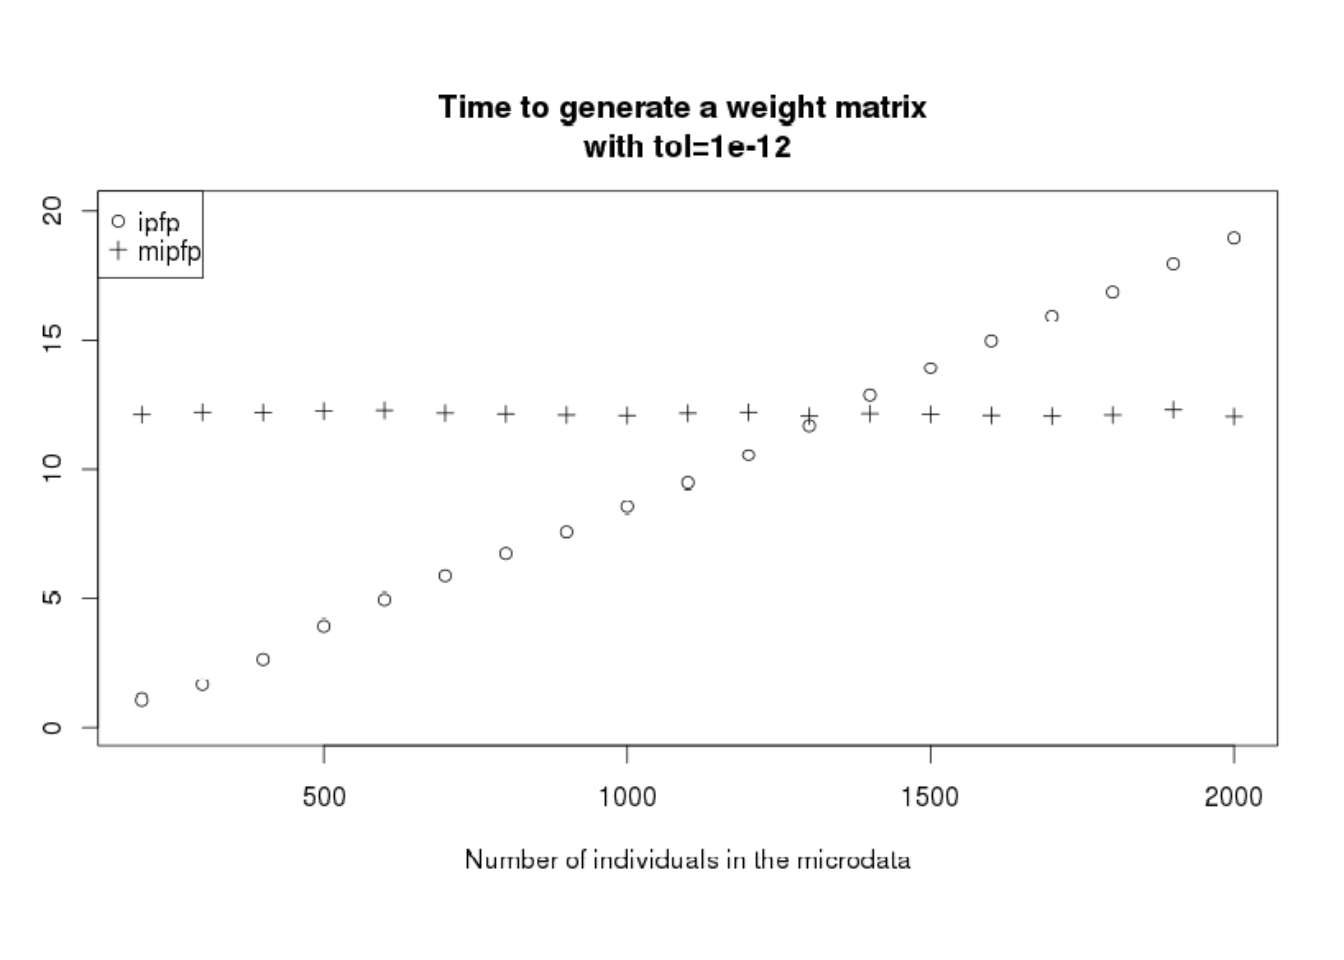 Time necessary to perform the generation of the weight matrix depending on the number of individuals inside the microdata.